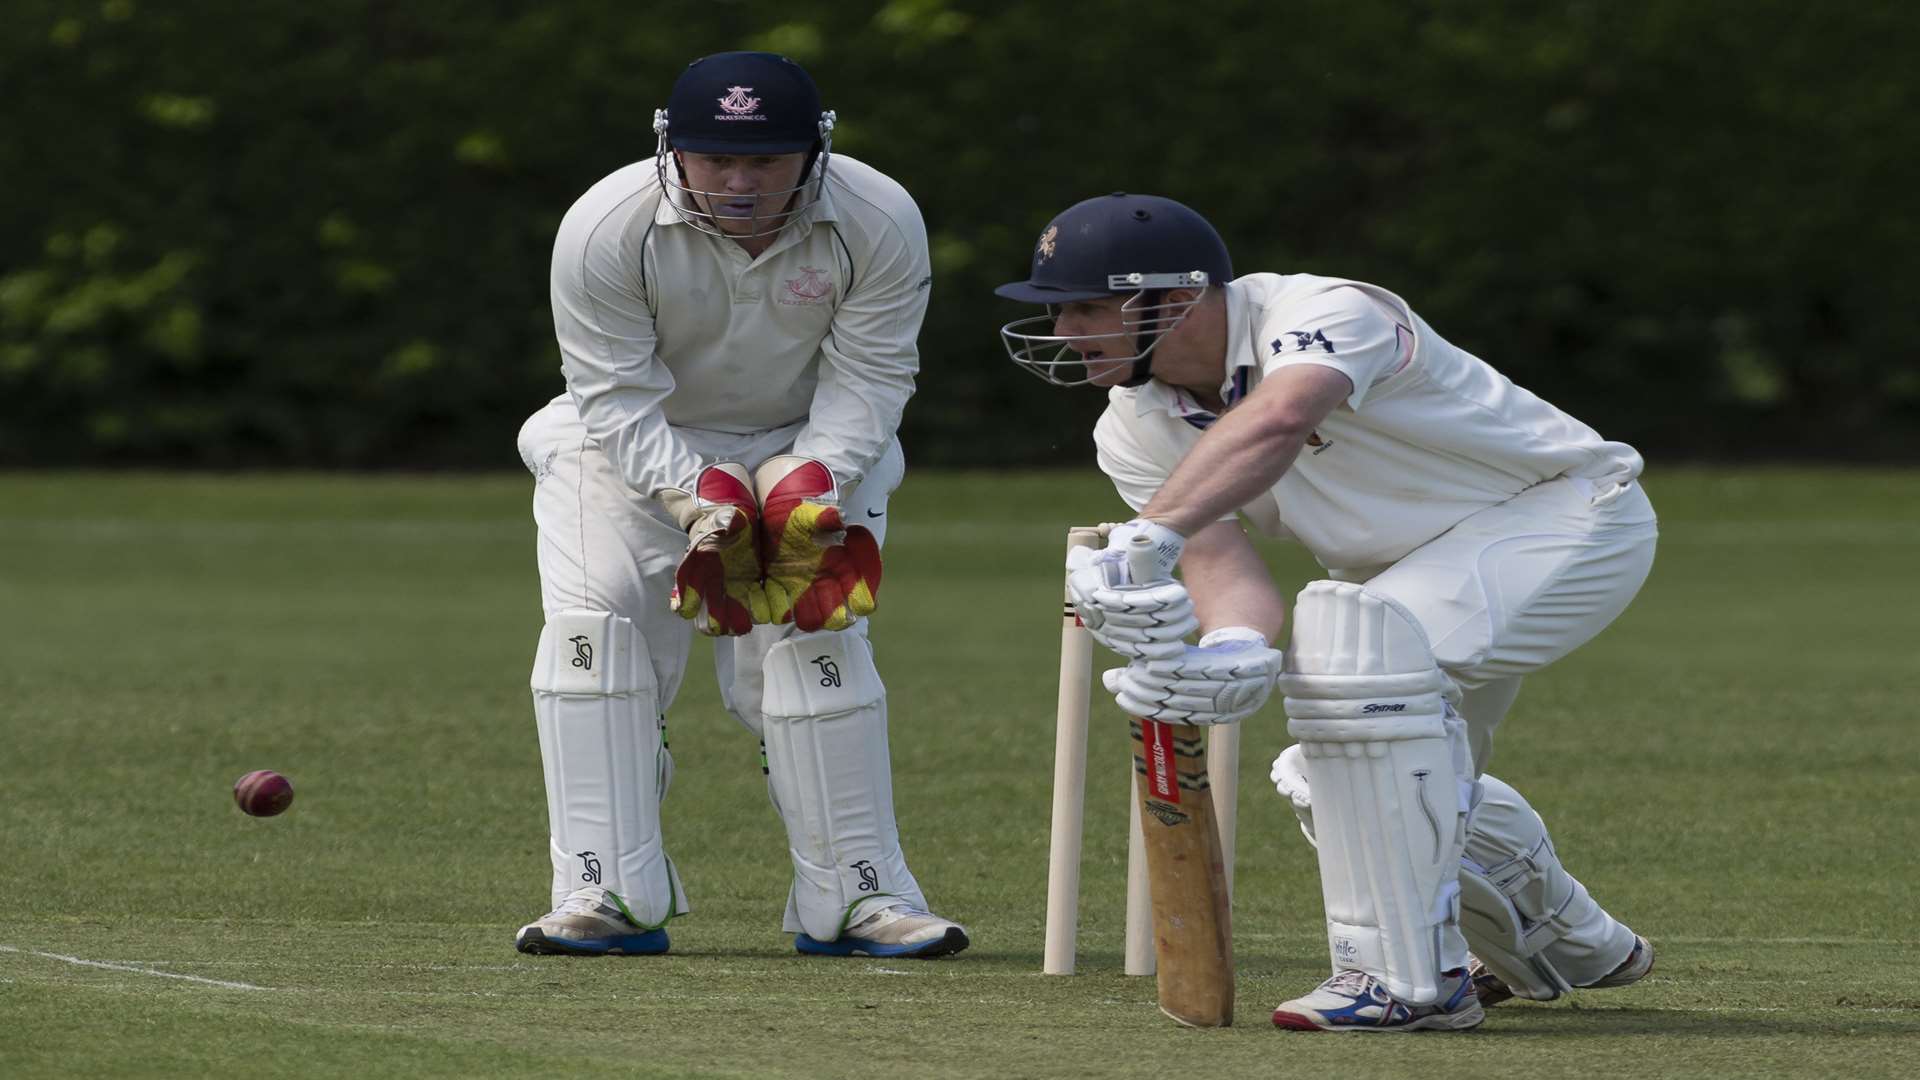 James Hockley batting for Hartley Country Club against Folkestone Picture: Andy Payton